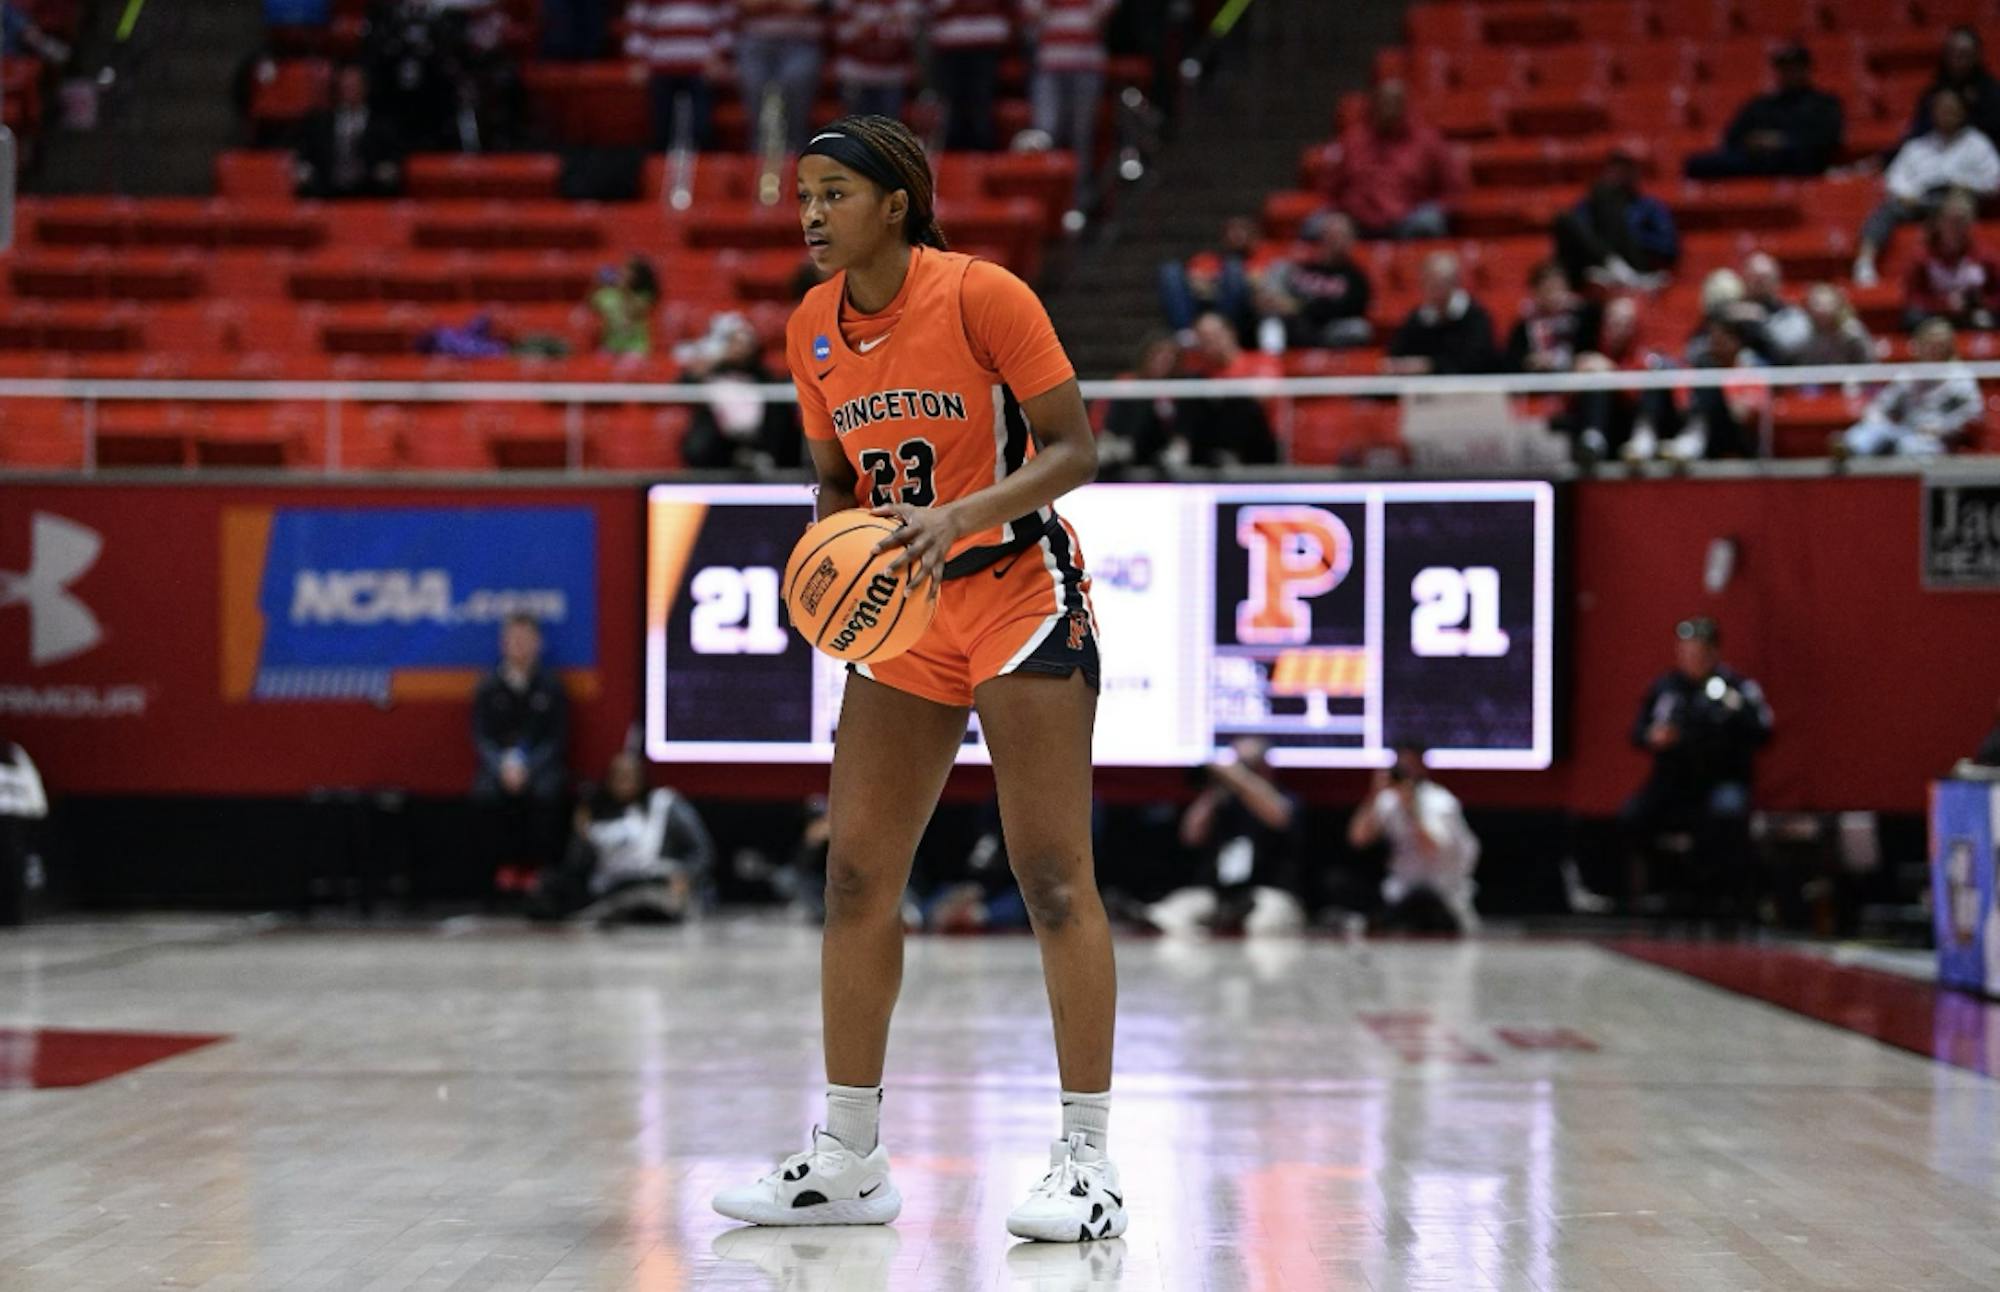 Woman in orange jersey holds basketball.